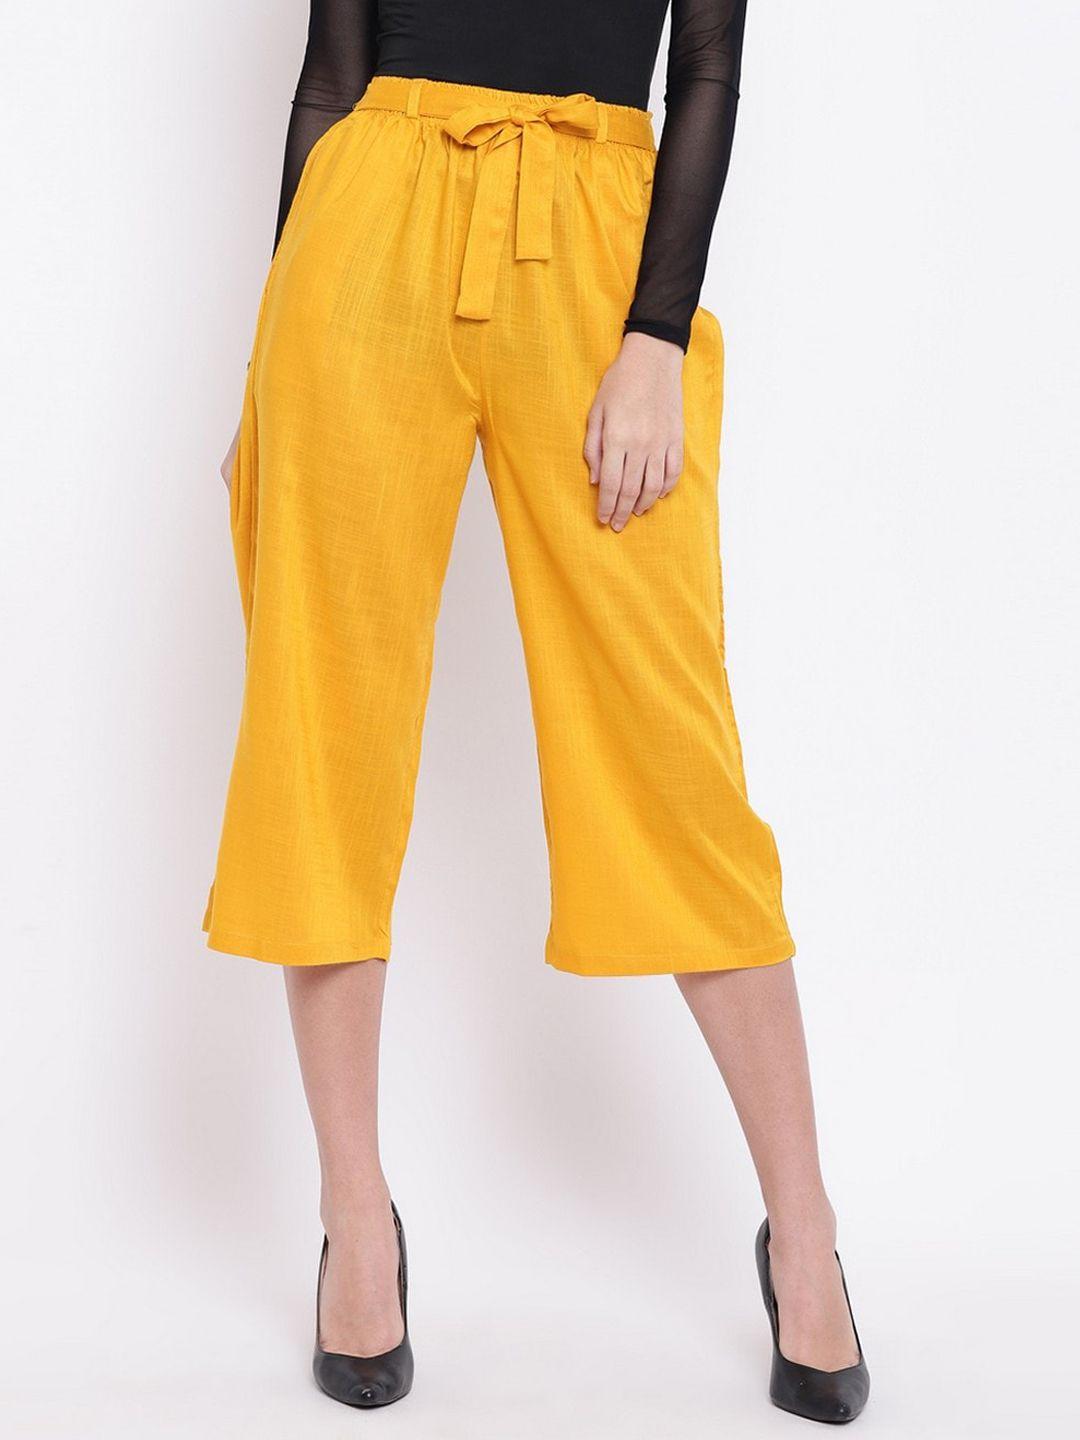 rivi women mustard yellow loose fit pleated pure cotton culottes trousers